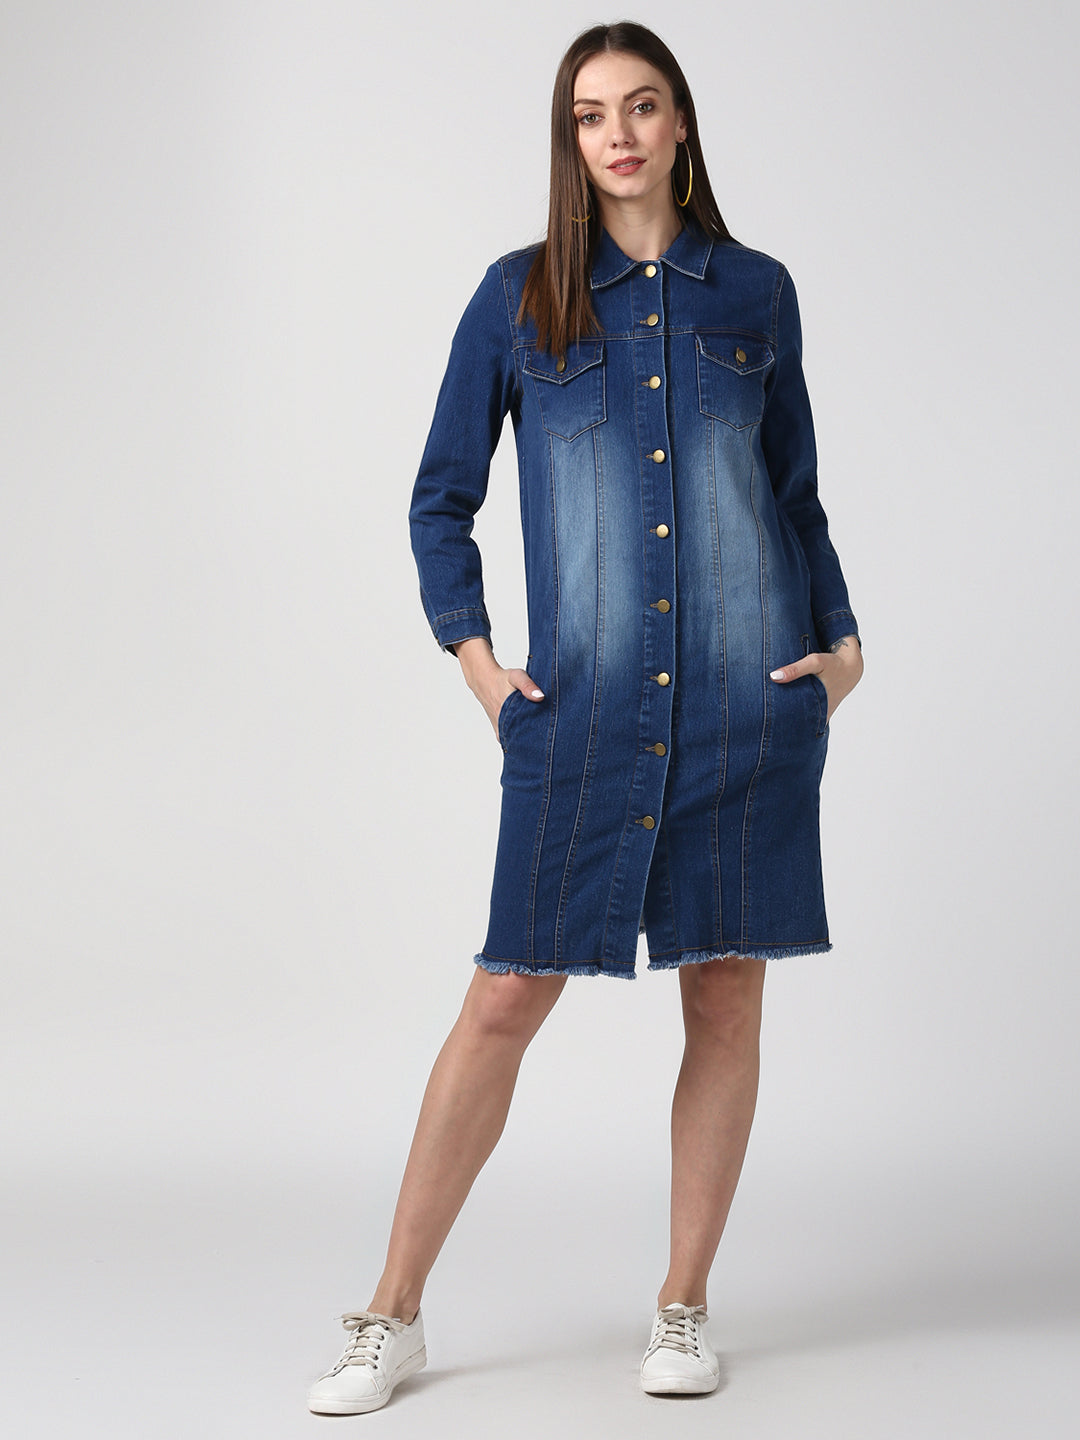 Women's Navy Blue Long Overcoat Style Denim Jacket with Washed effect